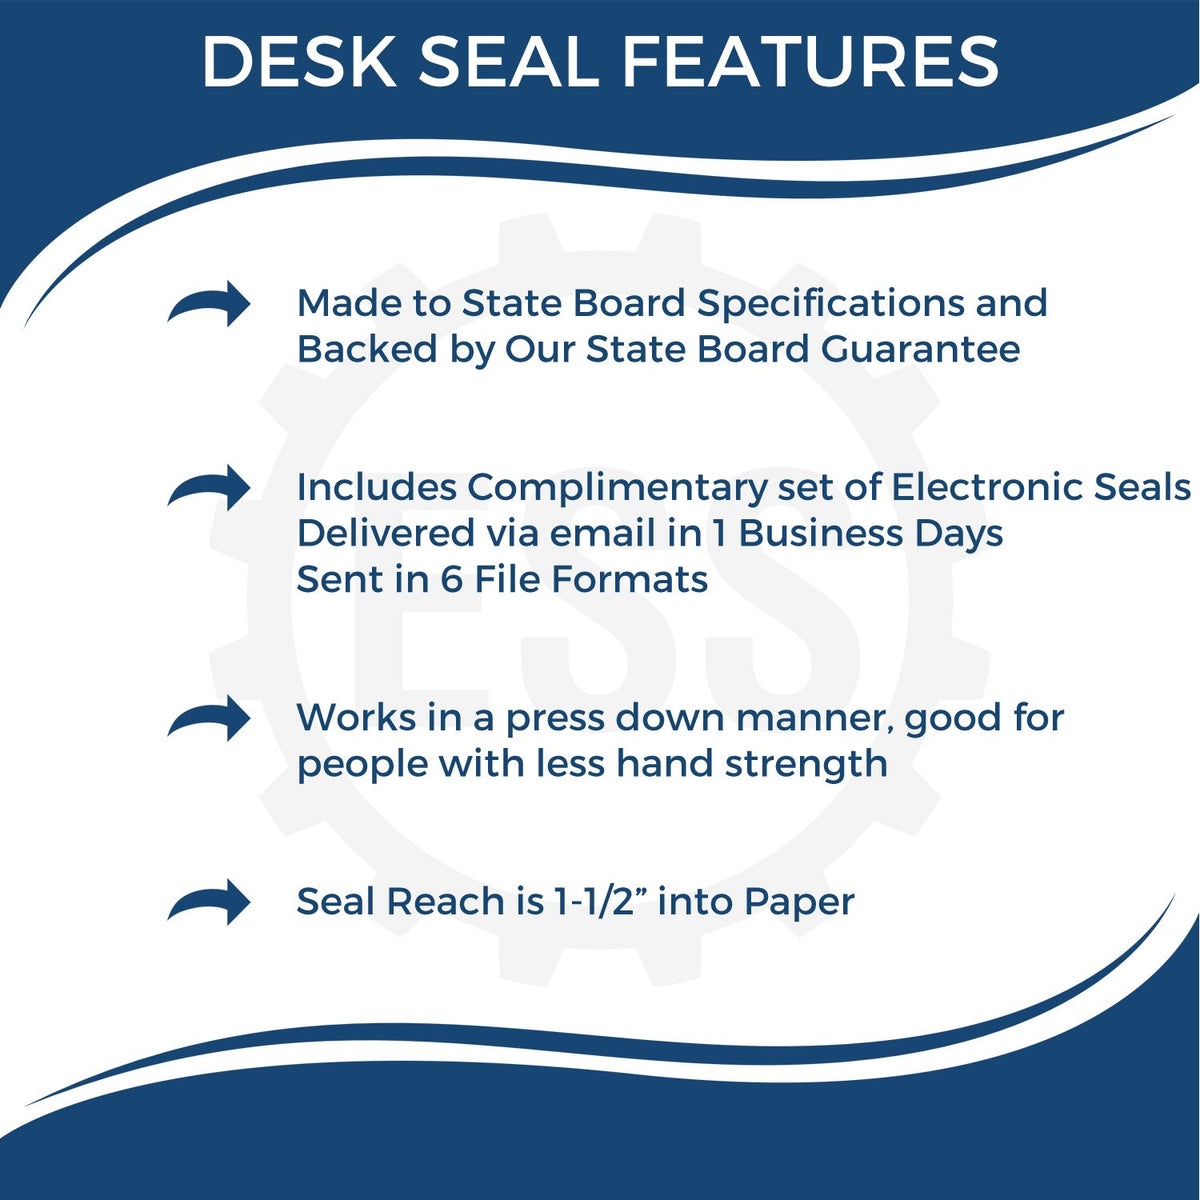 A picture of an infographic highlighting the selling points for the Indiana Desk Architect Embossing Seal